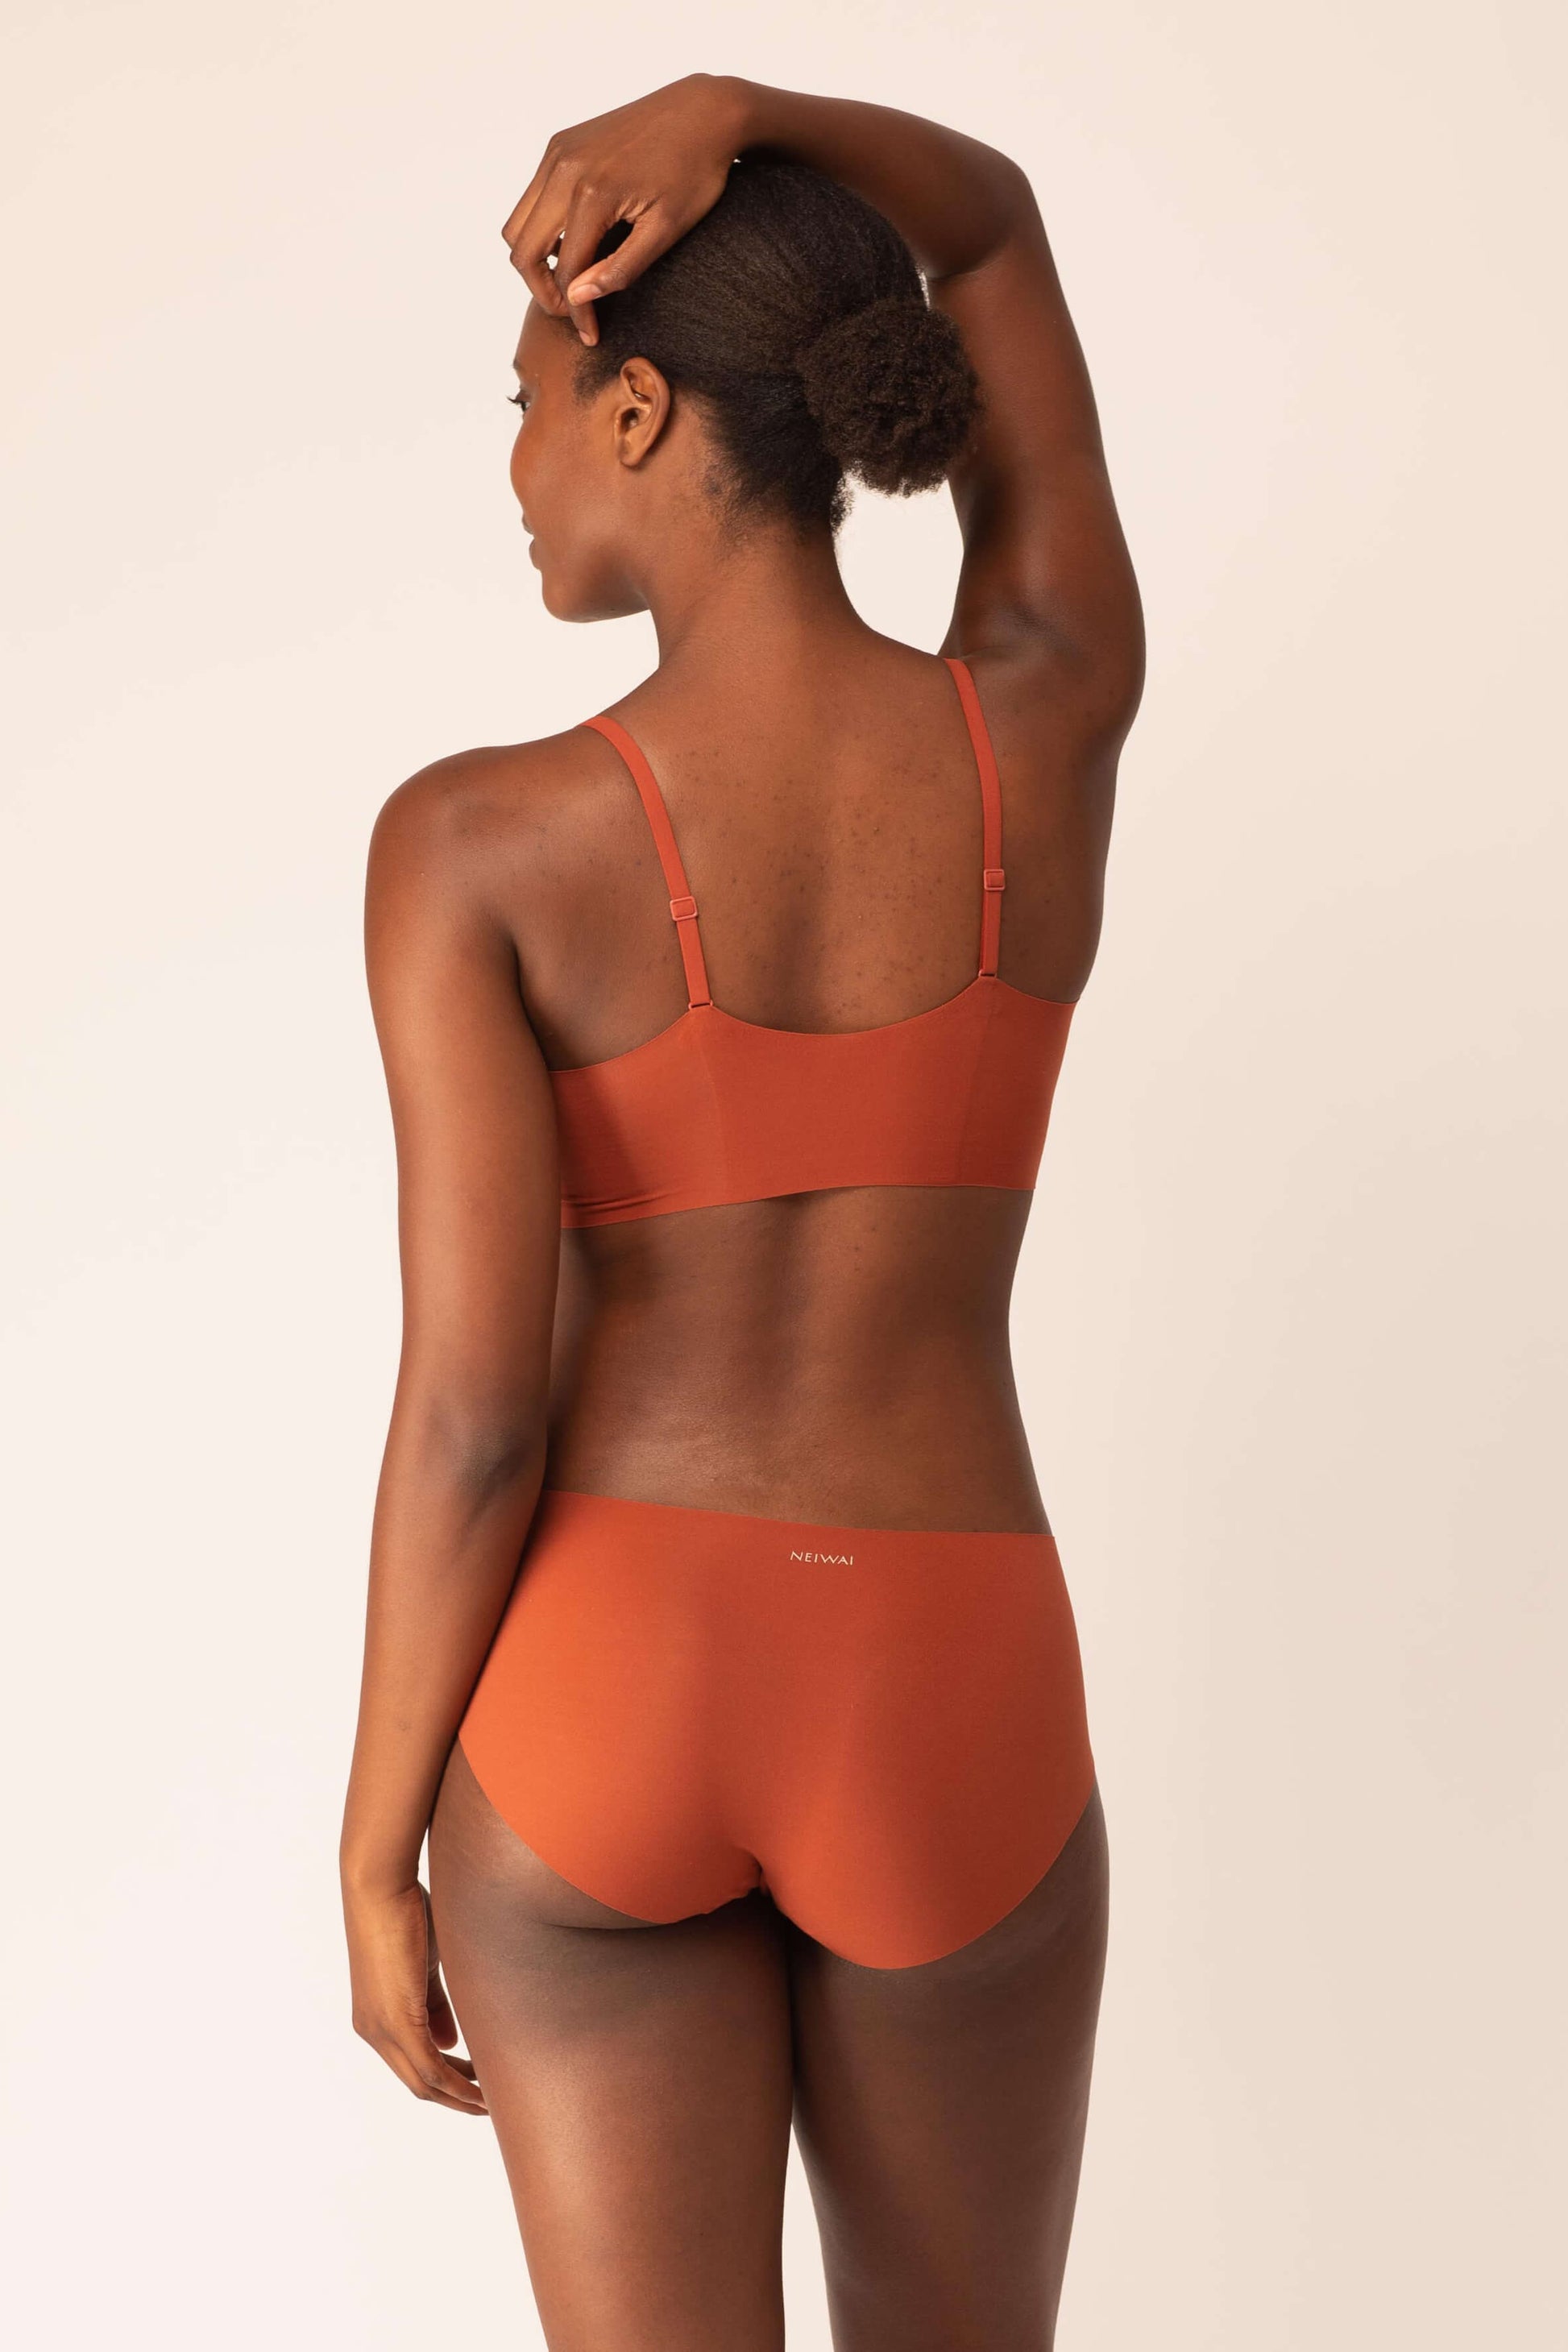 back of woman in tanned orange color bra and brief